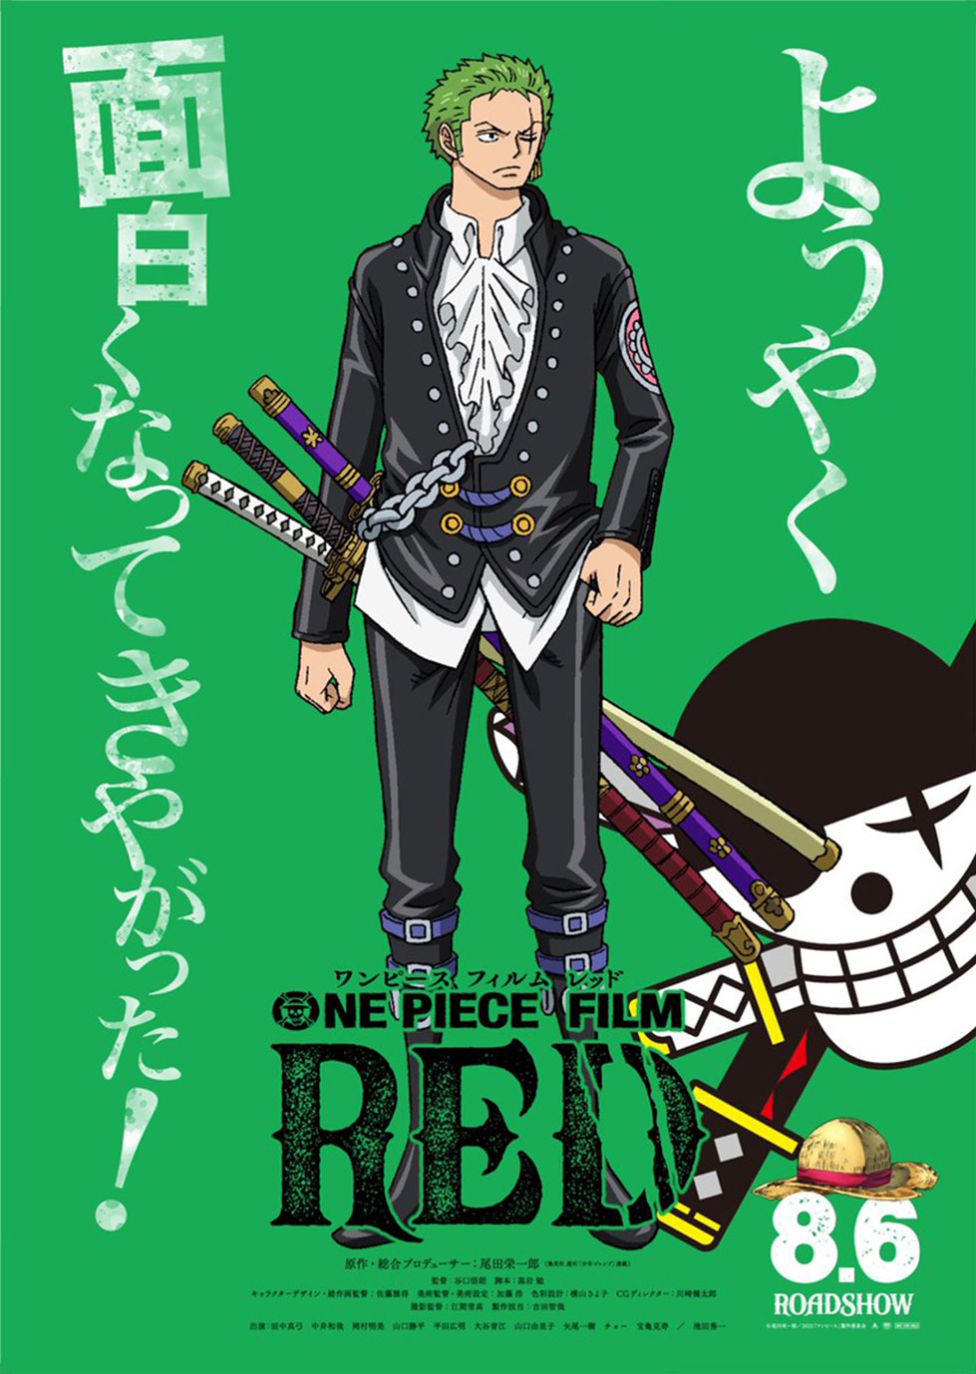 One Piece Film RED unveils Luffy and Zoro's spectacular new costumes for the movie